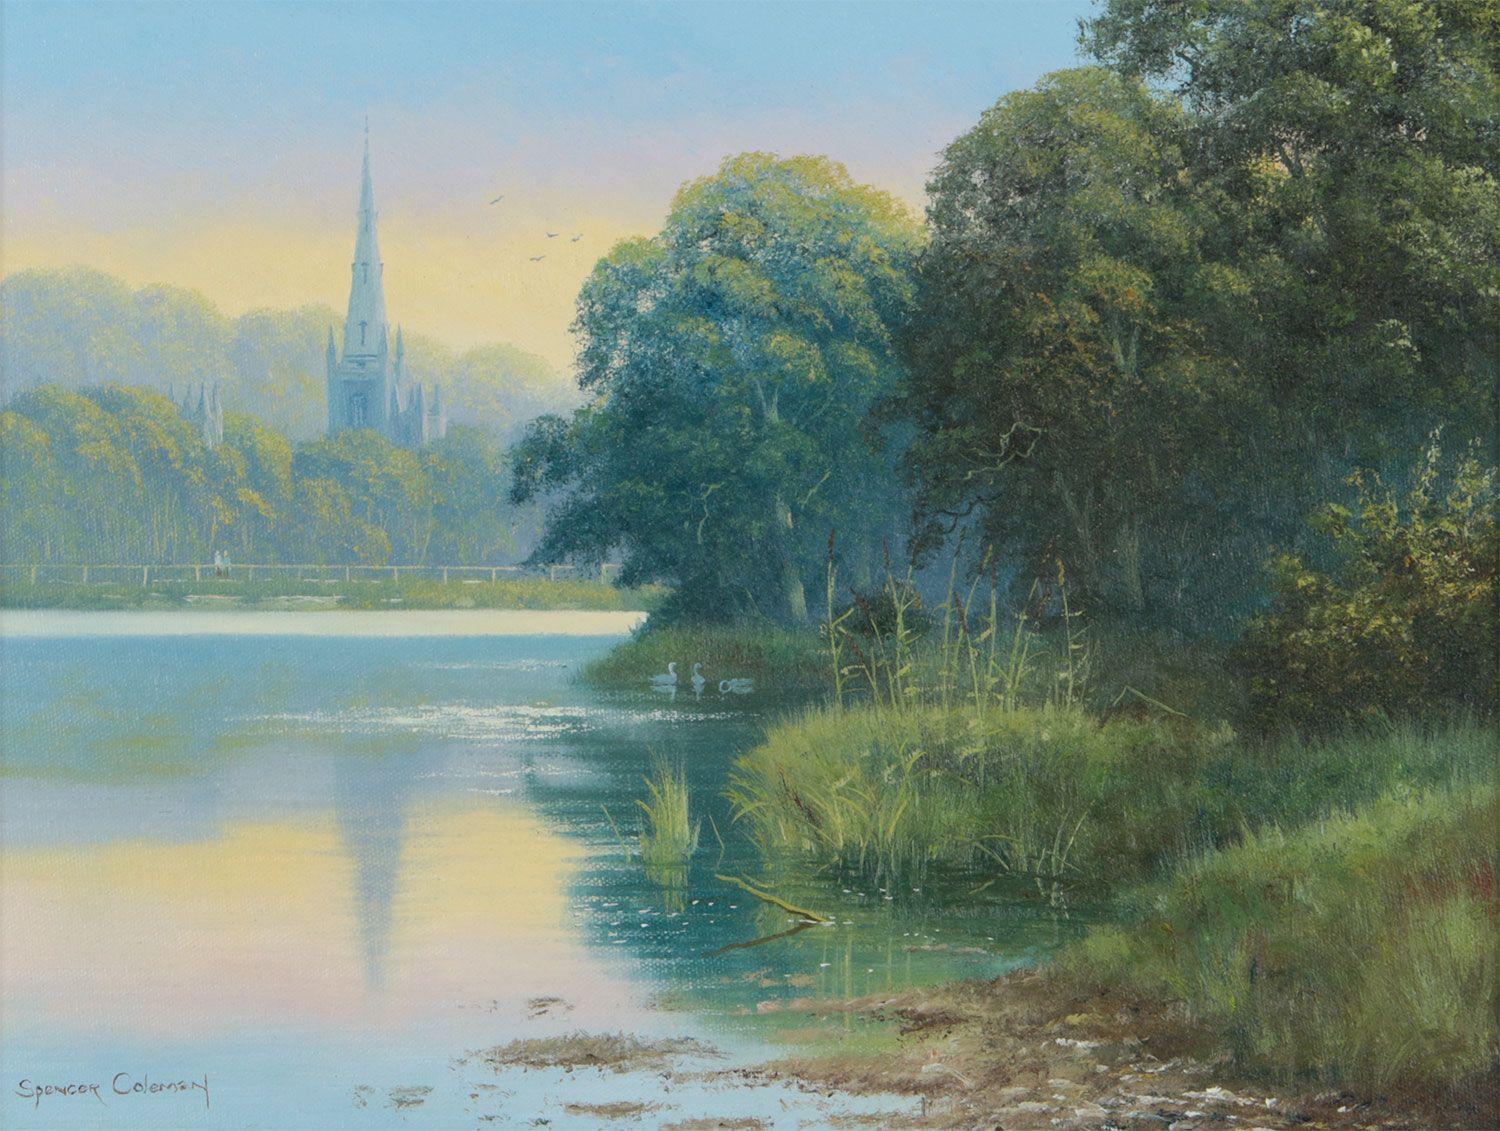 Unique Original Painting of Misty Rural Countryside Scene with Lake, Swans & Church in Ireland. Oil on canvas, signed. 

Art measures 16 x 12 inches 
Frame measures 21 x 17 inches 

Spencer Coleman (b. 1952) is widely considered to be one of the